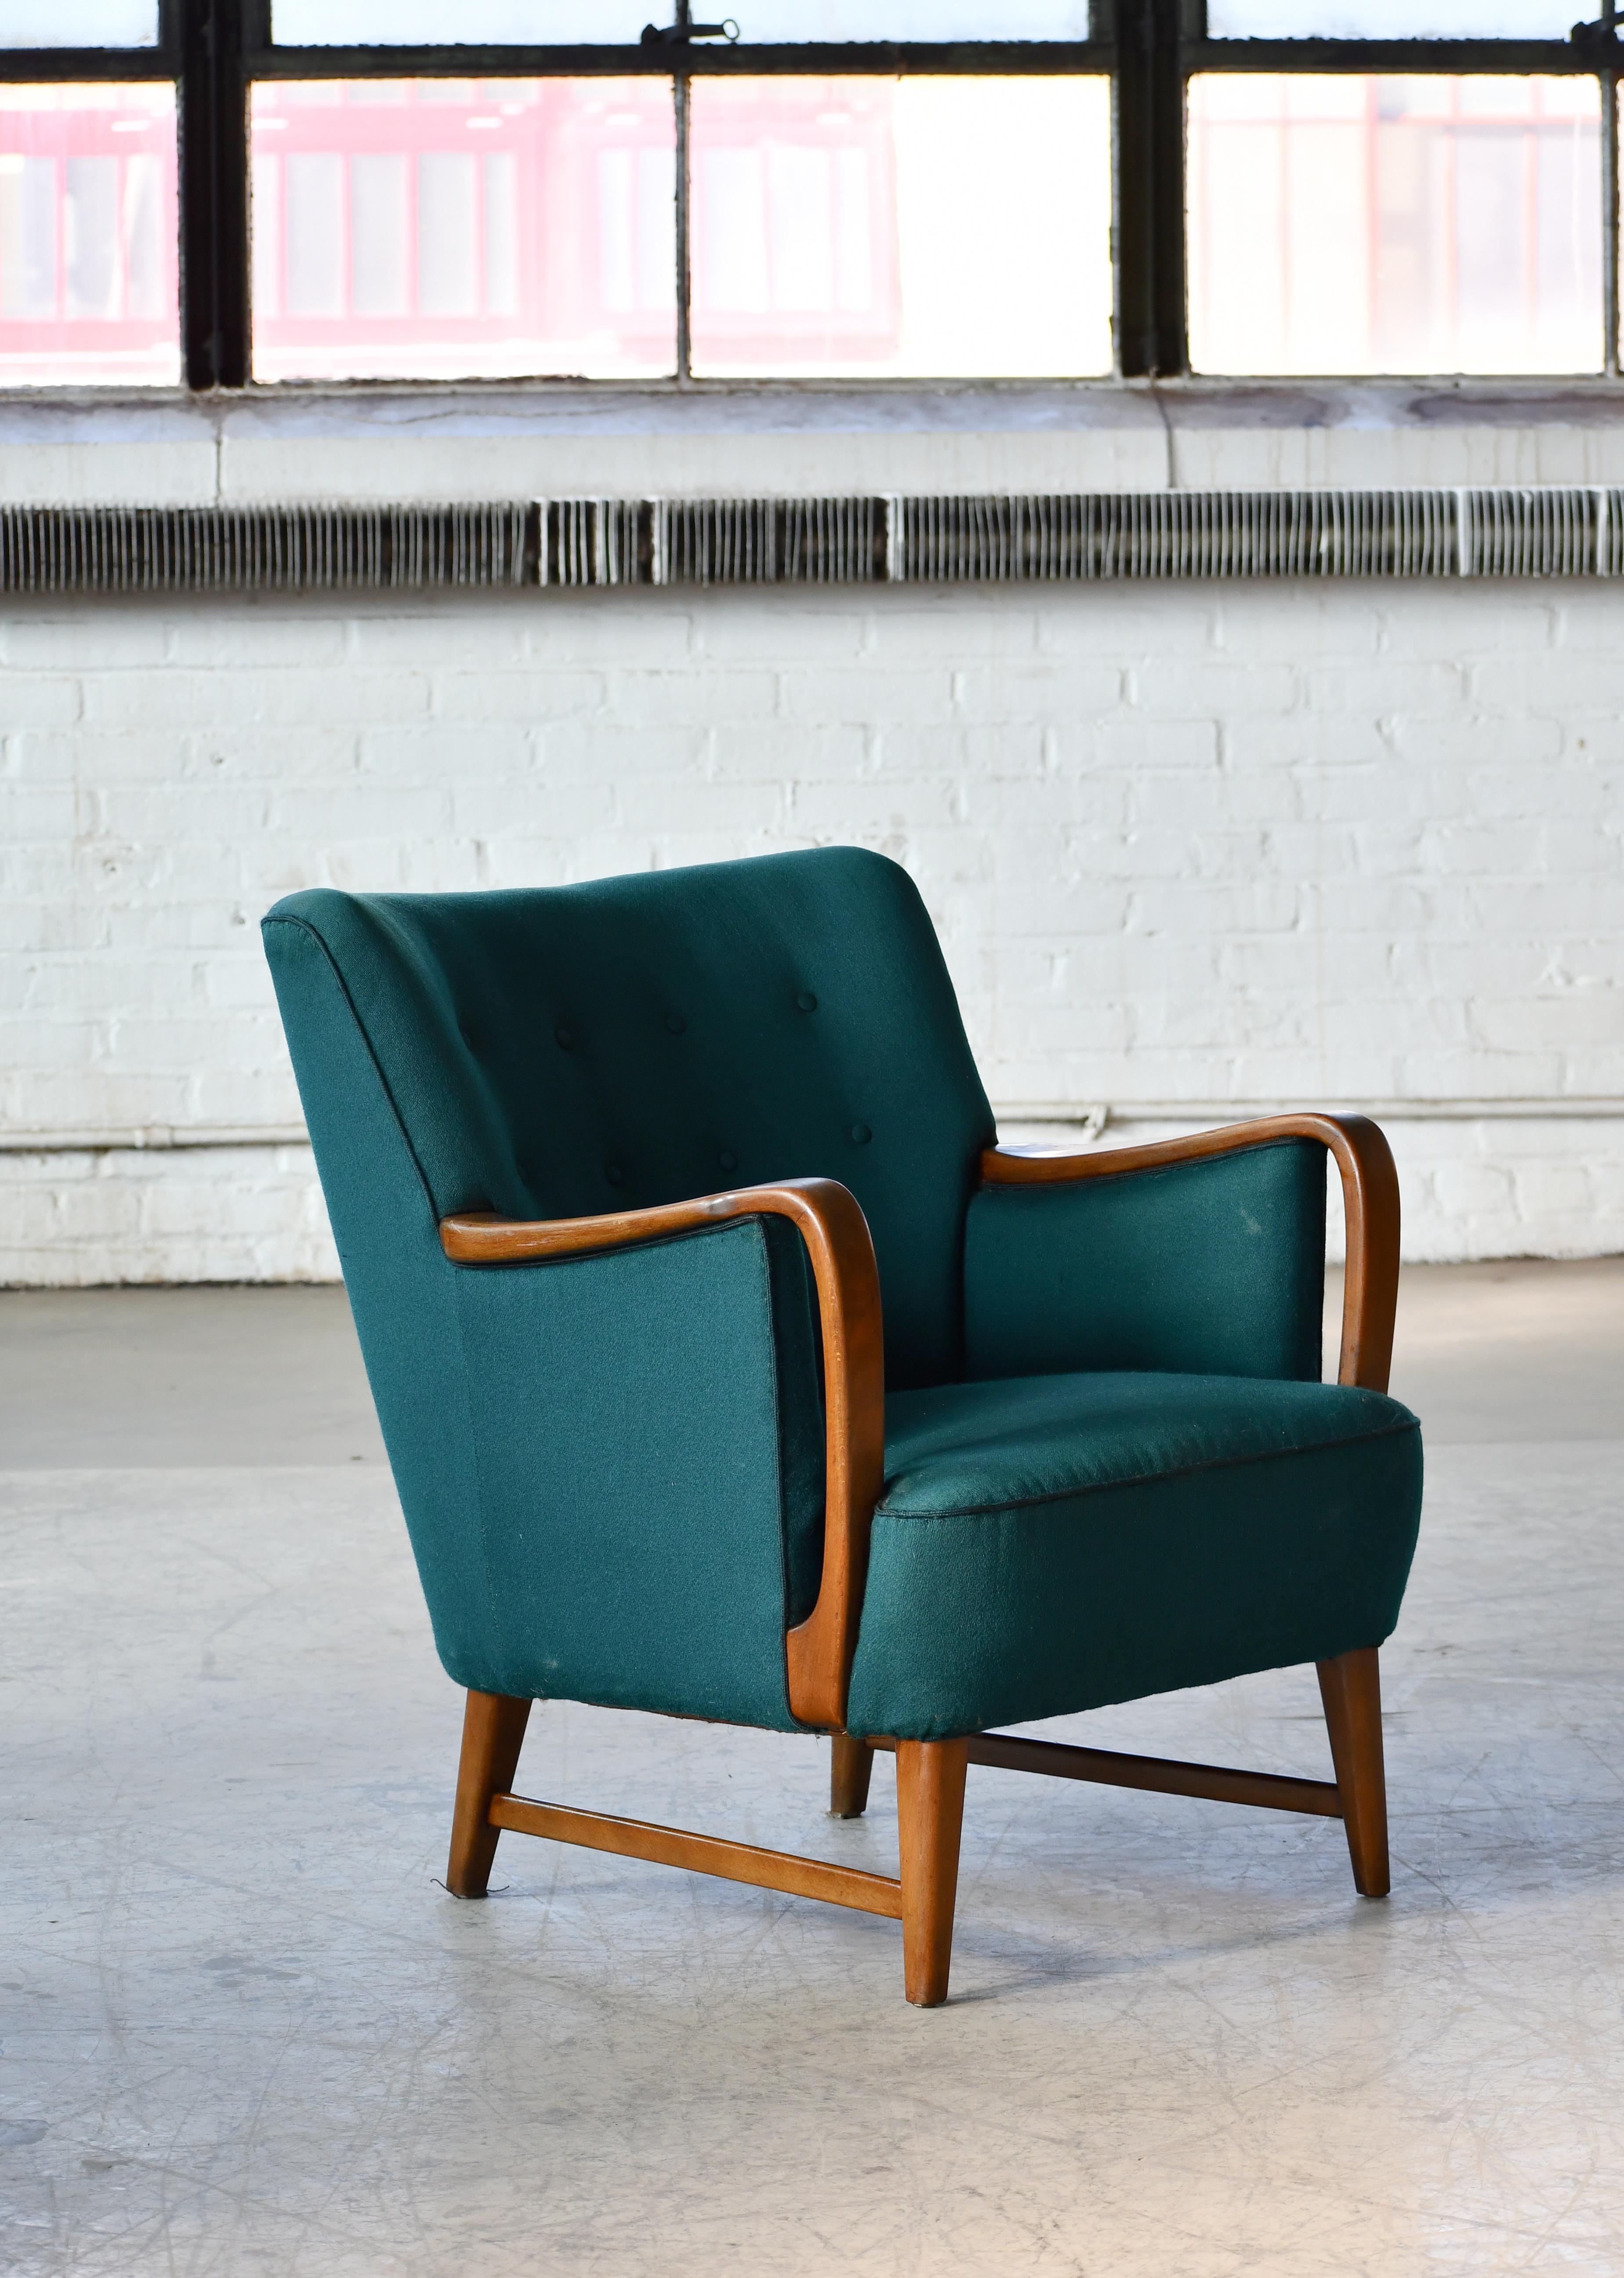 Mid-Century Modern Midcentury Danish Lounge Chair in Oak and Wool by N.A. Jorgensen  For Sale